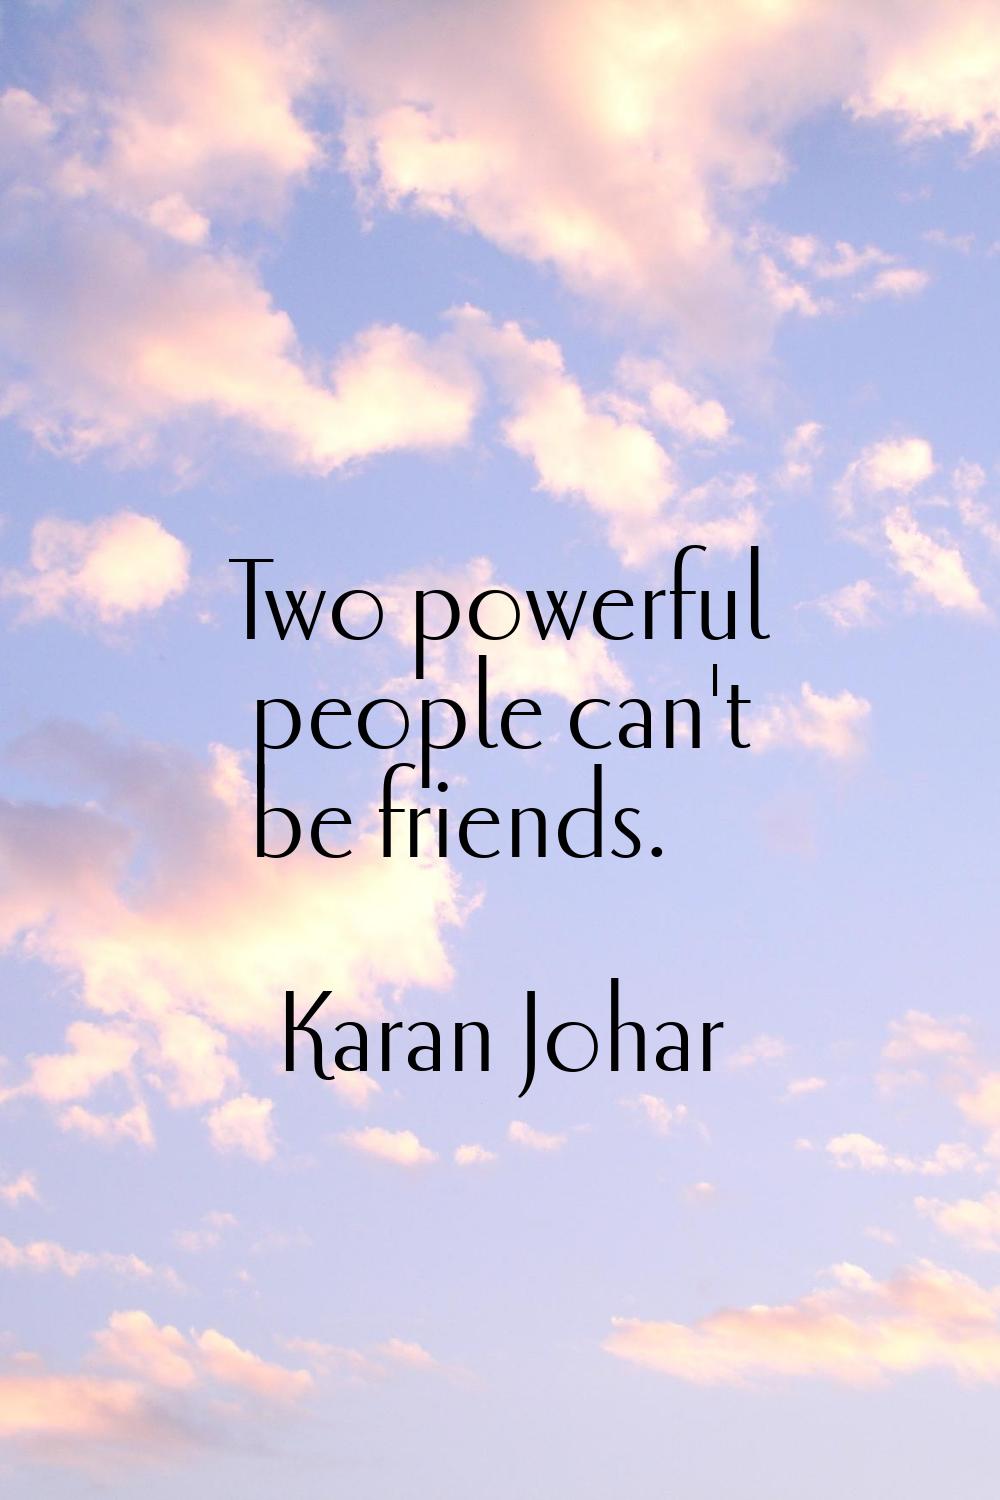 Two powerful people can't be friends.